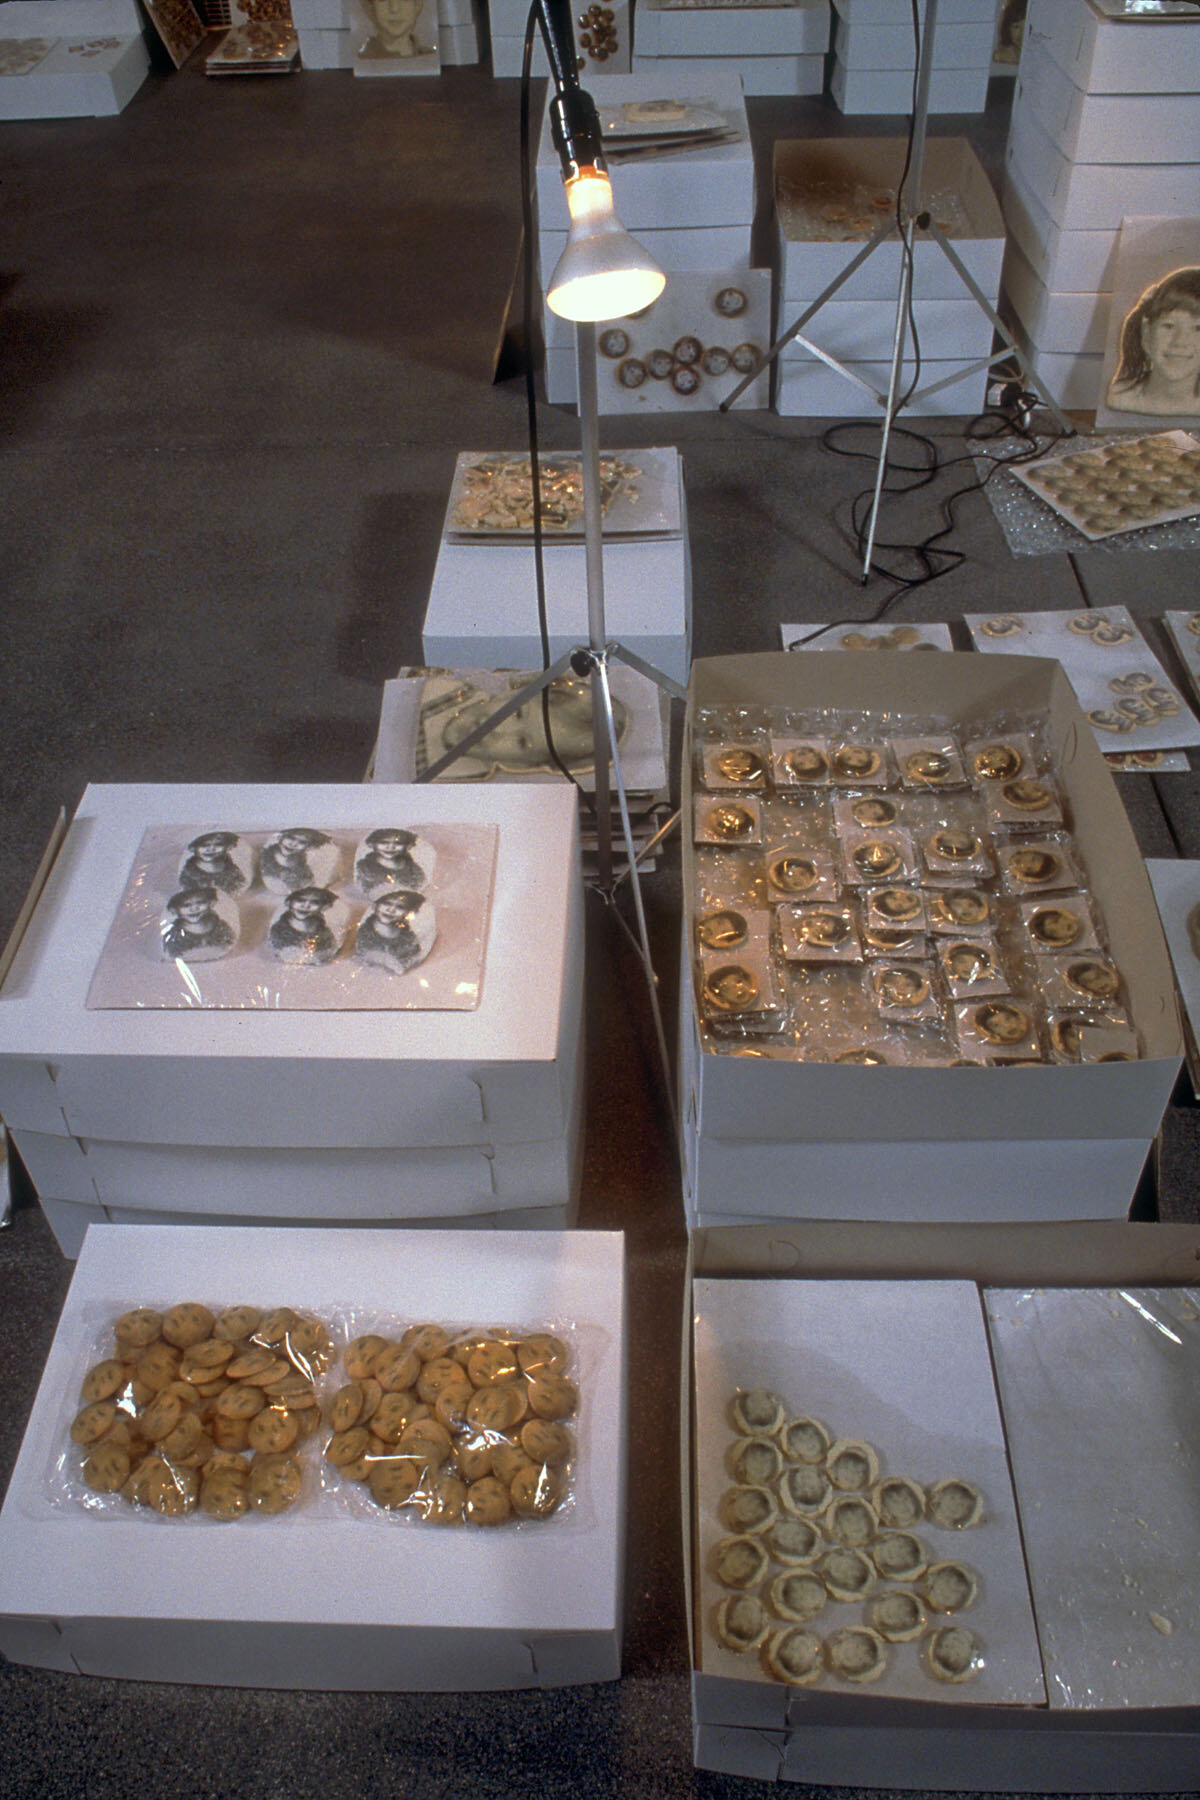   Untitled (cookies) , installation detail, 1998, food coloring, ink, cookies, cardboard sheets and boxes, shrink wrap, push pins, clamp lights, aluminum stands, extension cords, 53 x 72 x 153 inches 